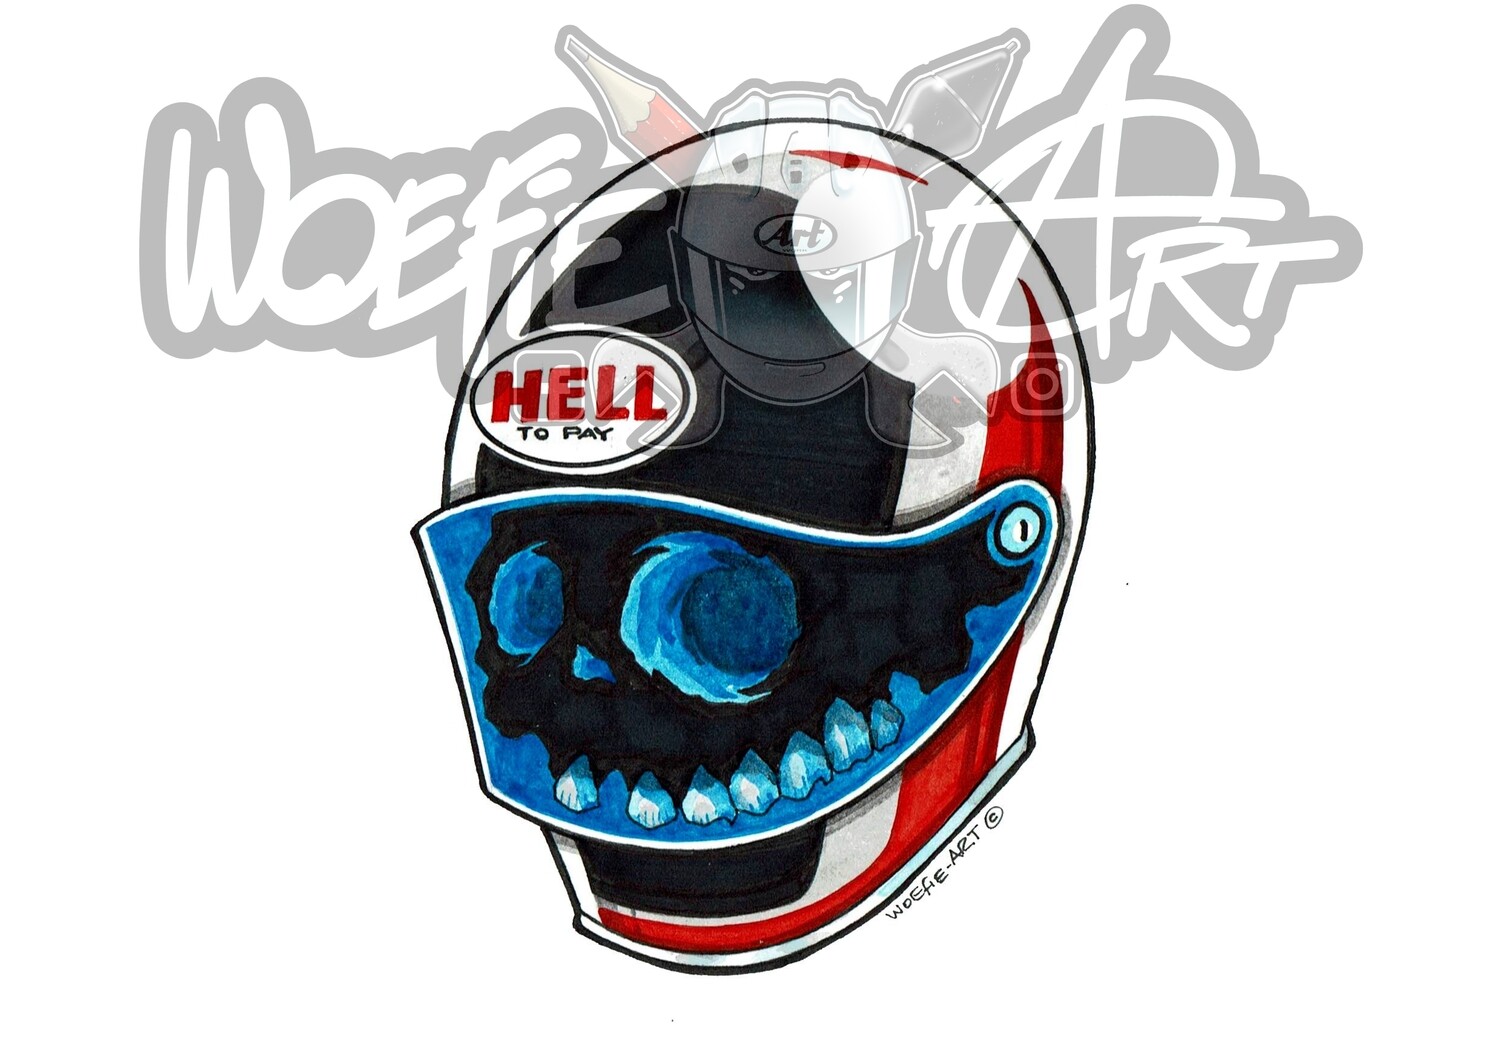 HELL WOEFIE_ART DECAL ( SOLD OUT)